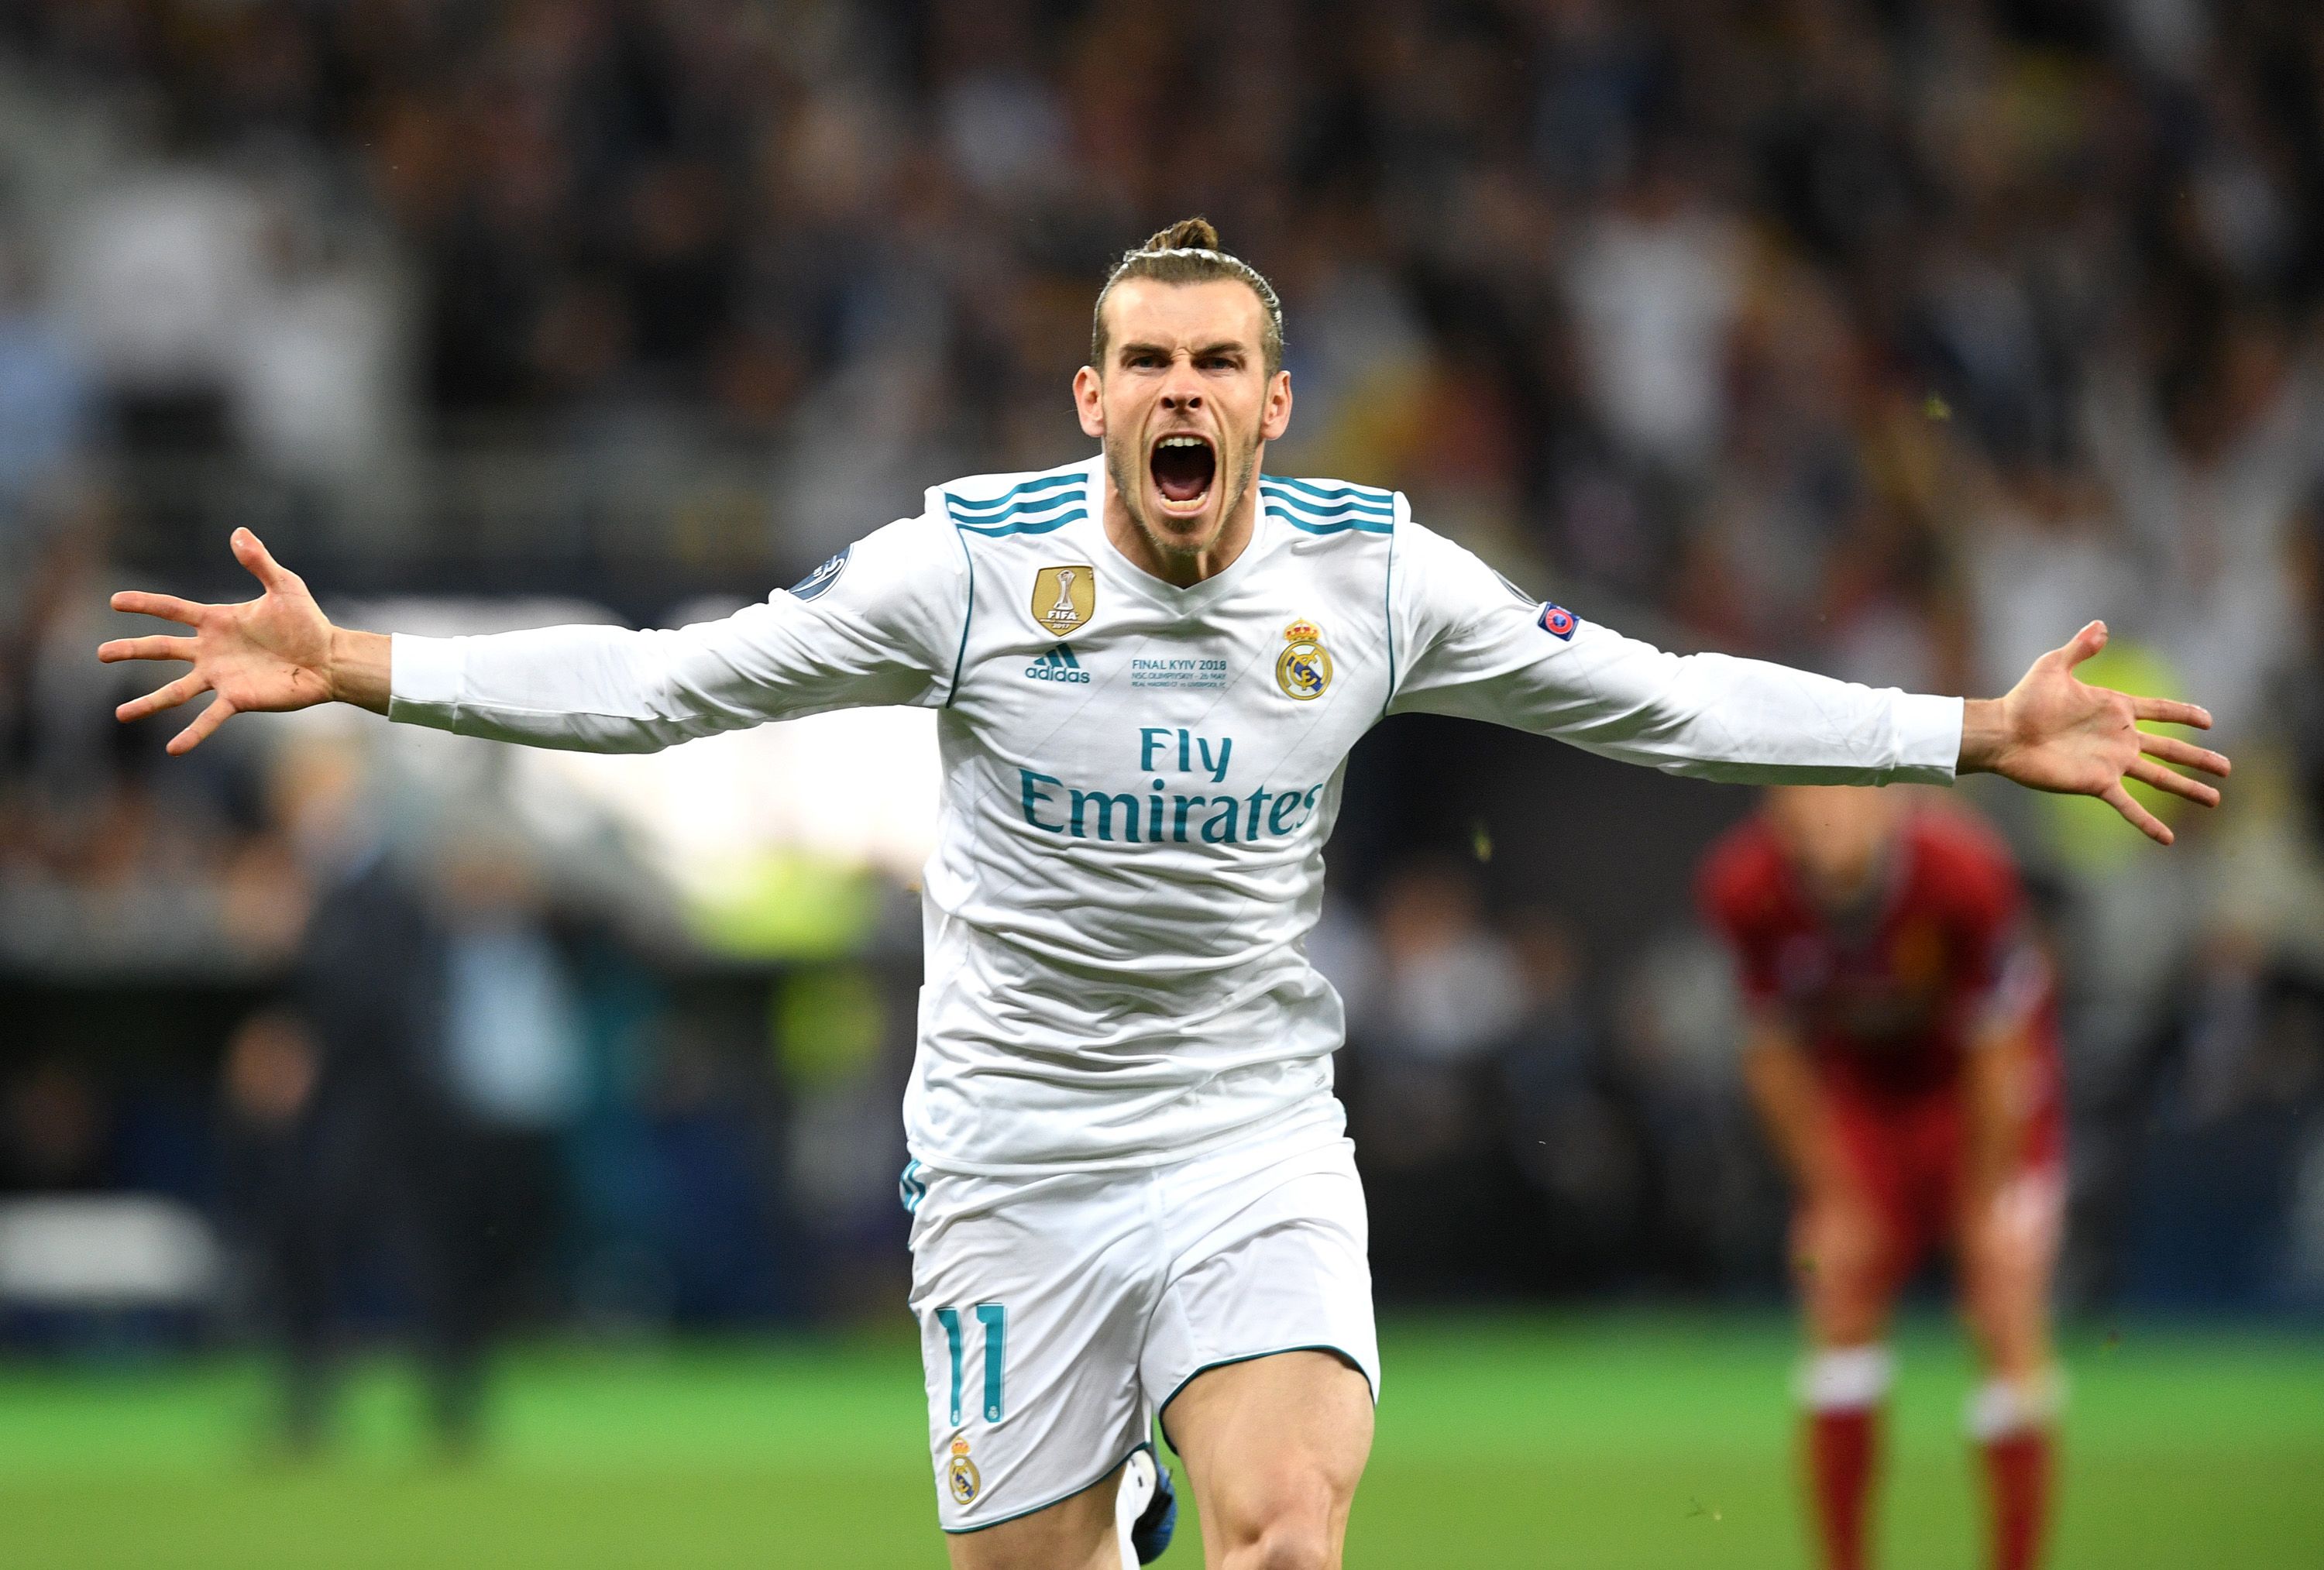 Former Real Madrid star Gareth Bale to join Los Angeles FC on one